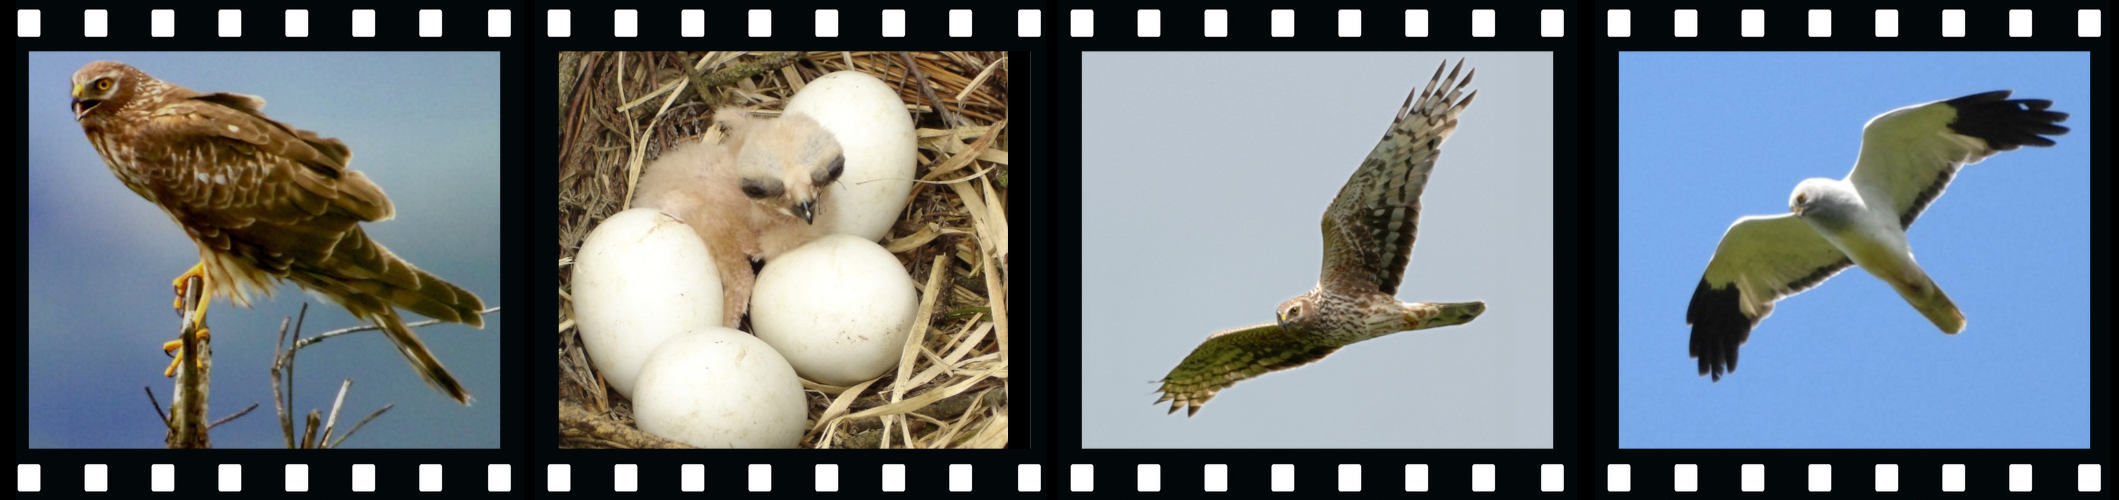 Film strip of photos of hen harriers, depicting a male bird in flight, a female bird in flight, a female bird perched and a nest containing chicks and eggs